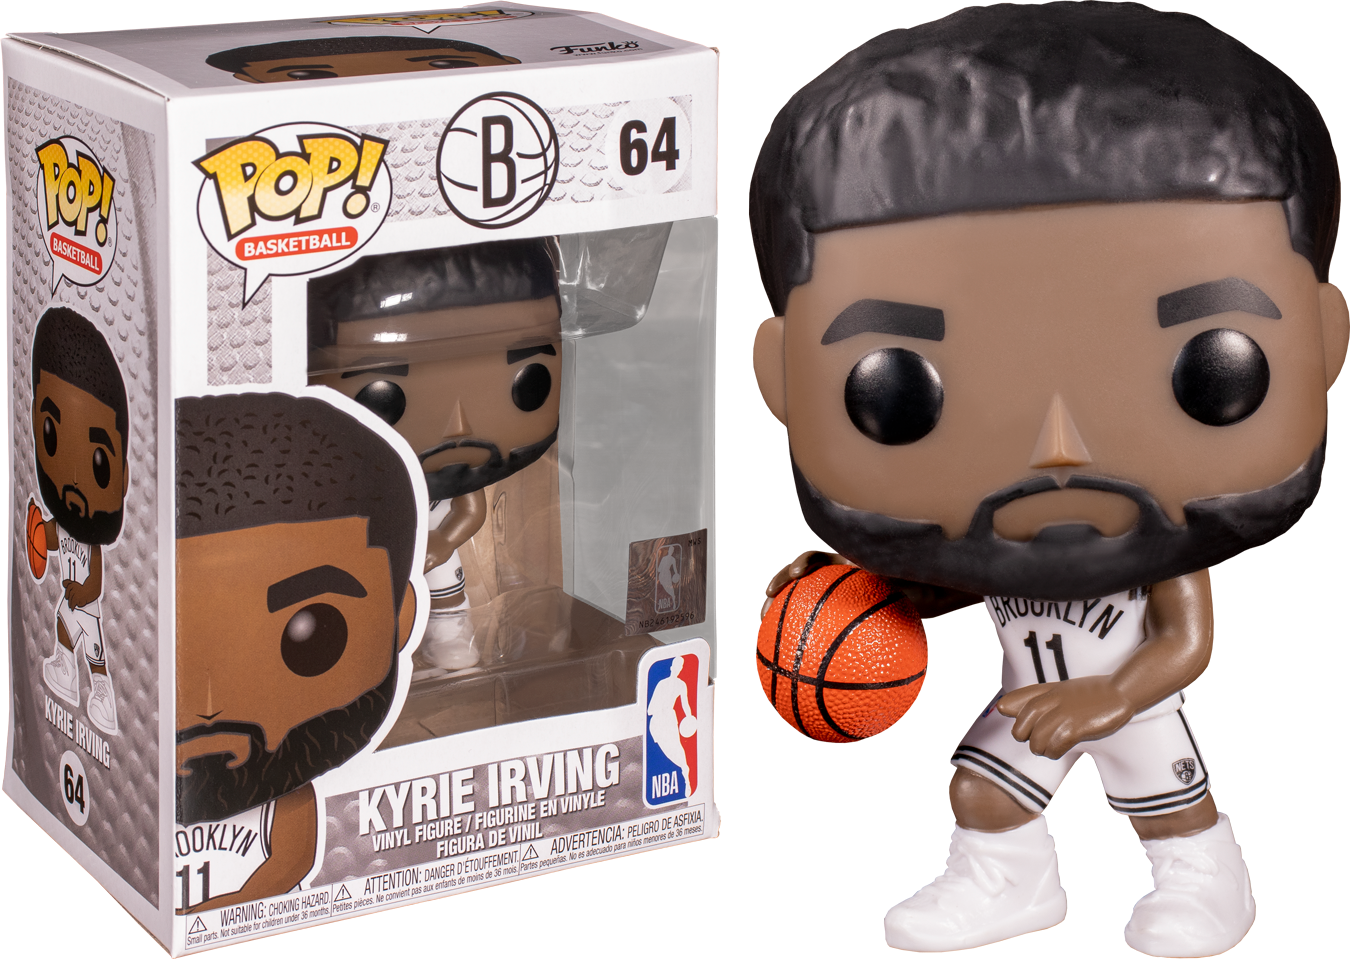 funko kyrie irving